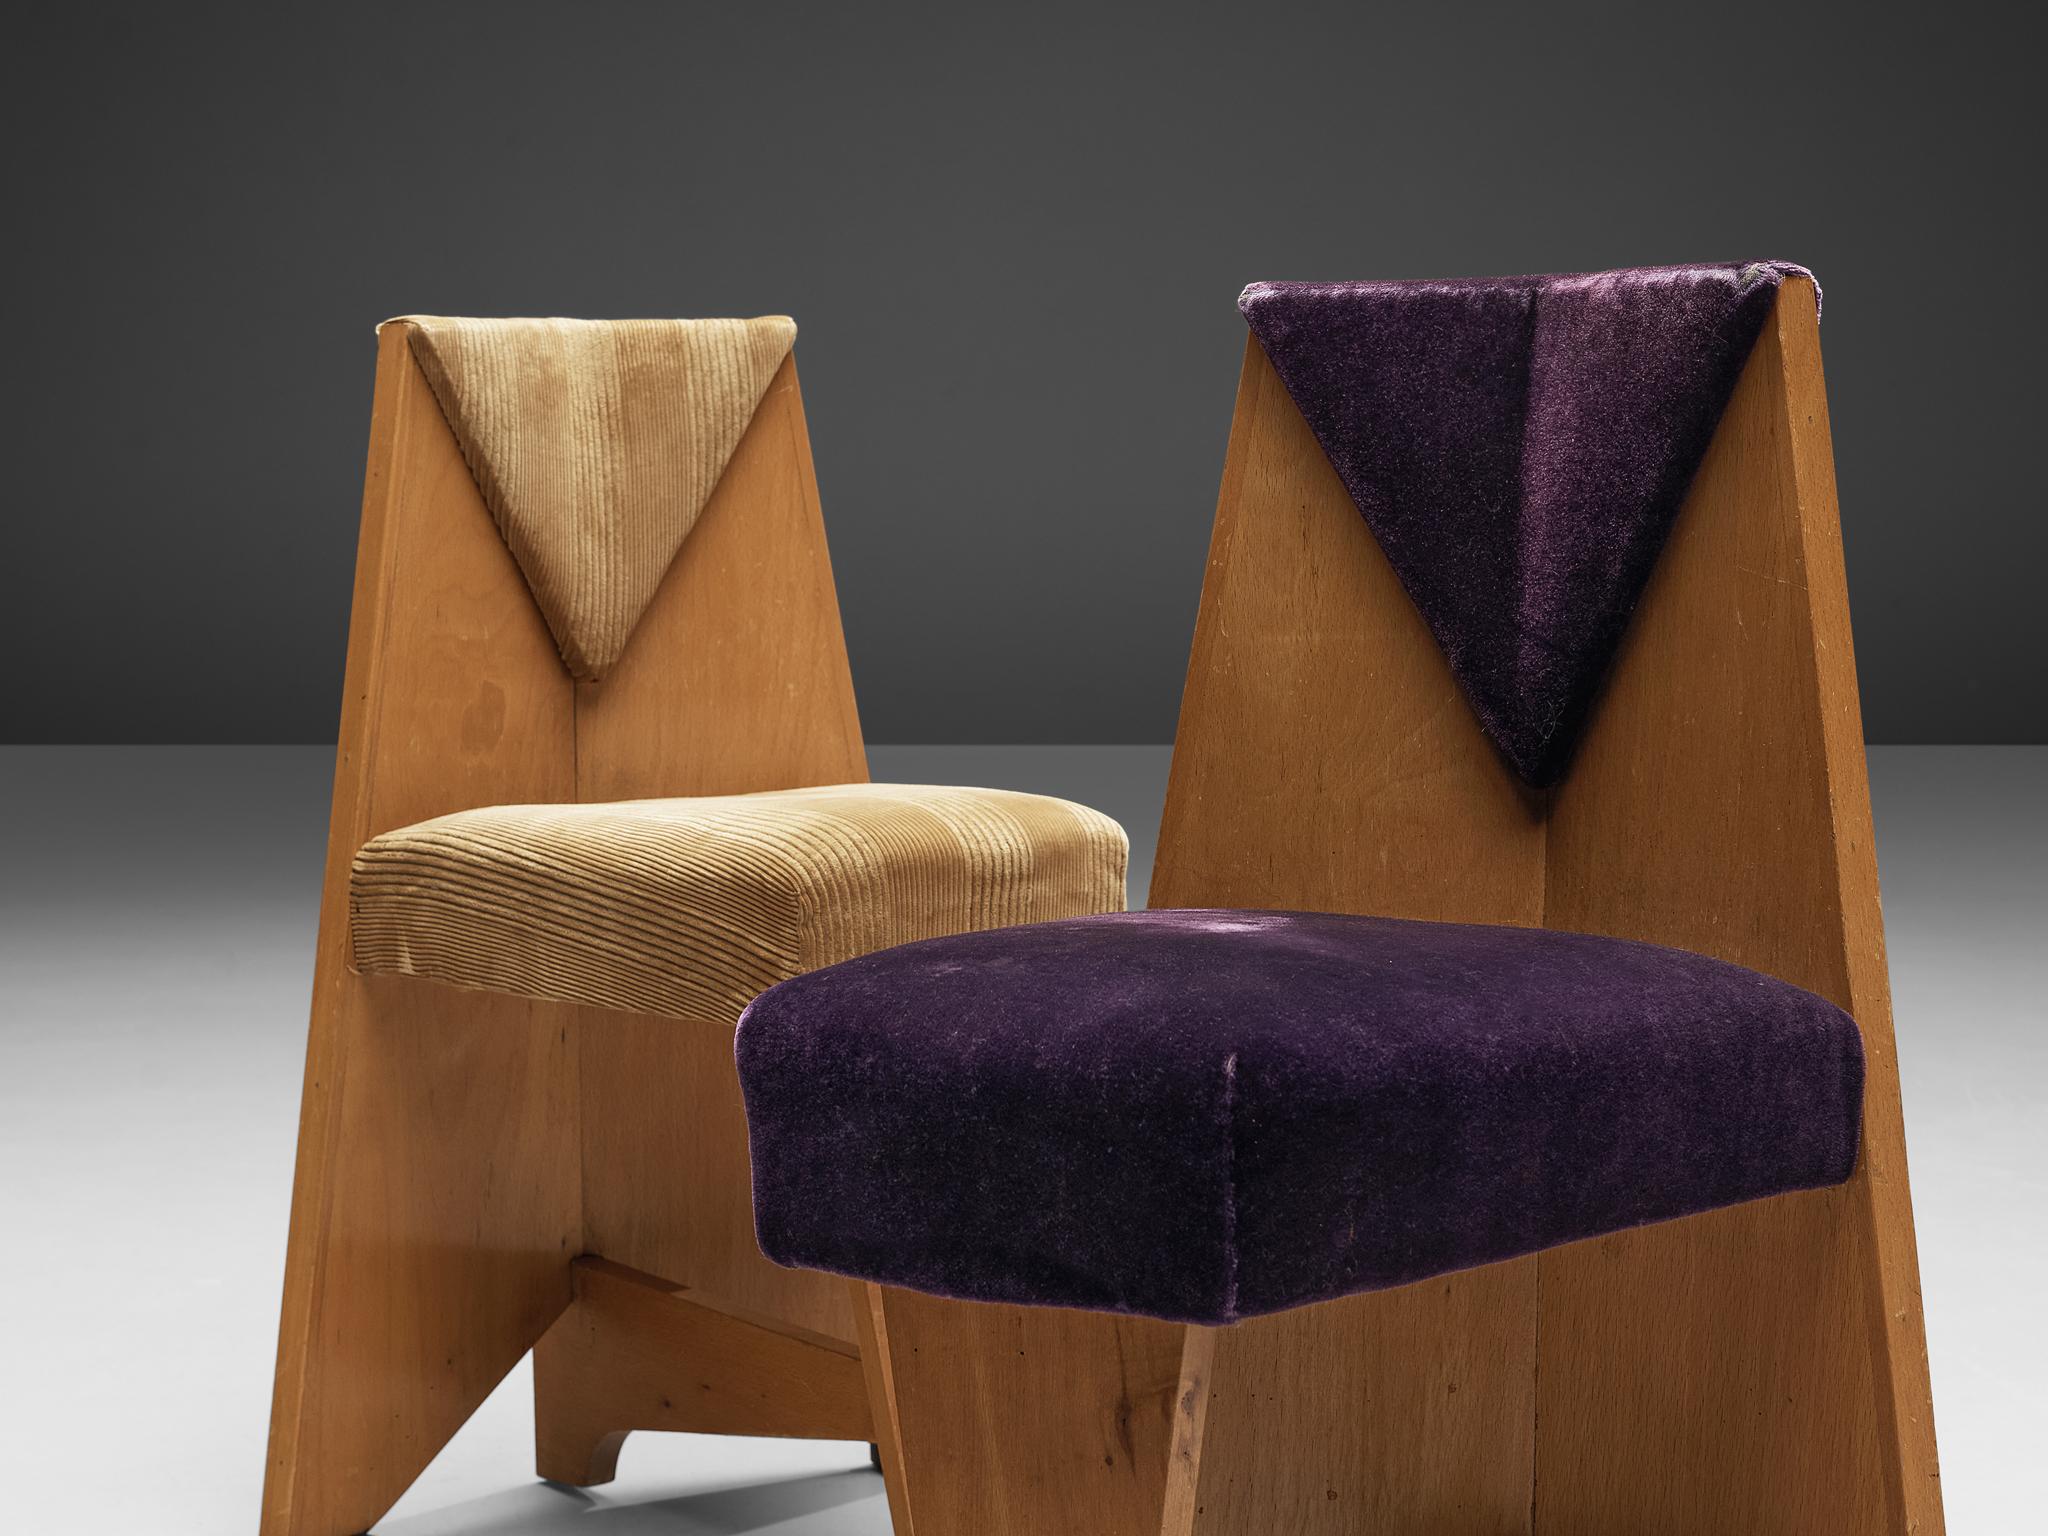 Laurens Groen for H.H. de Klerk & Zoonen, pair of chairs, birch, fabric upholstery, the Netherlands, 1924

These chairs by Dutch designer Laurens Groen have a striking, well-documented provenance. In the style of the so called Amsterdam School style